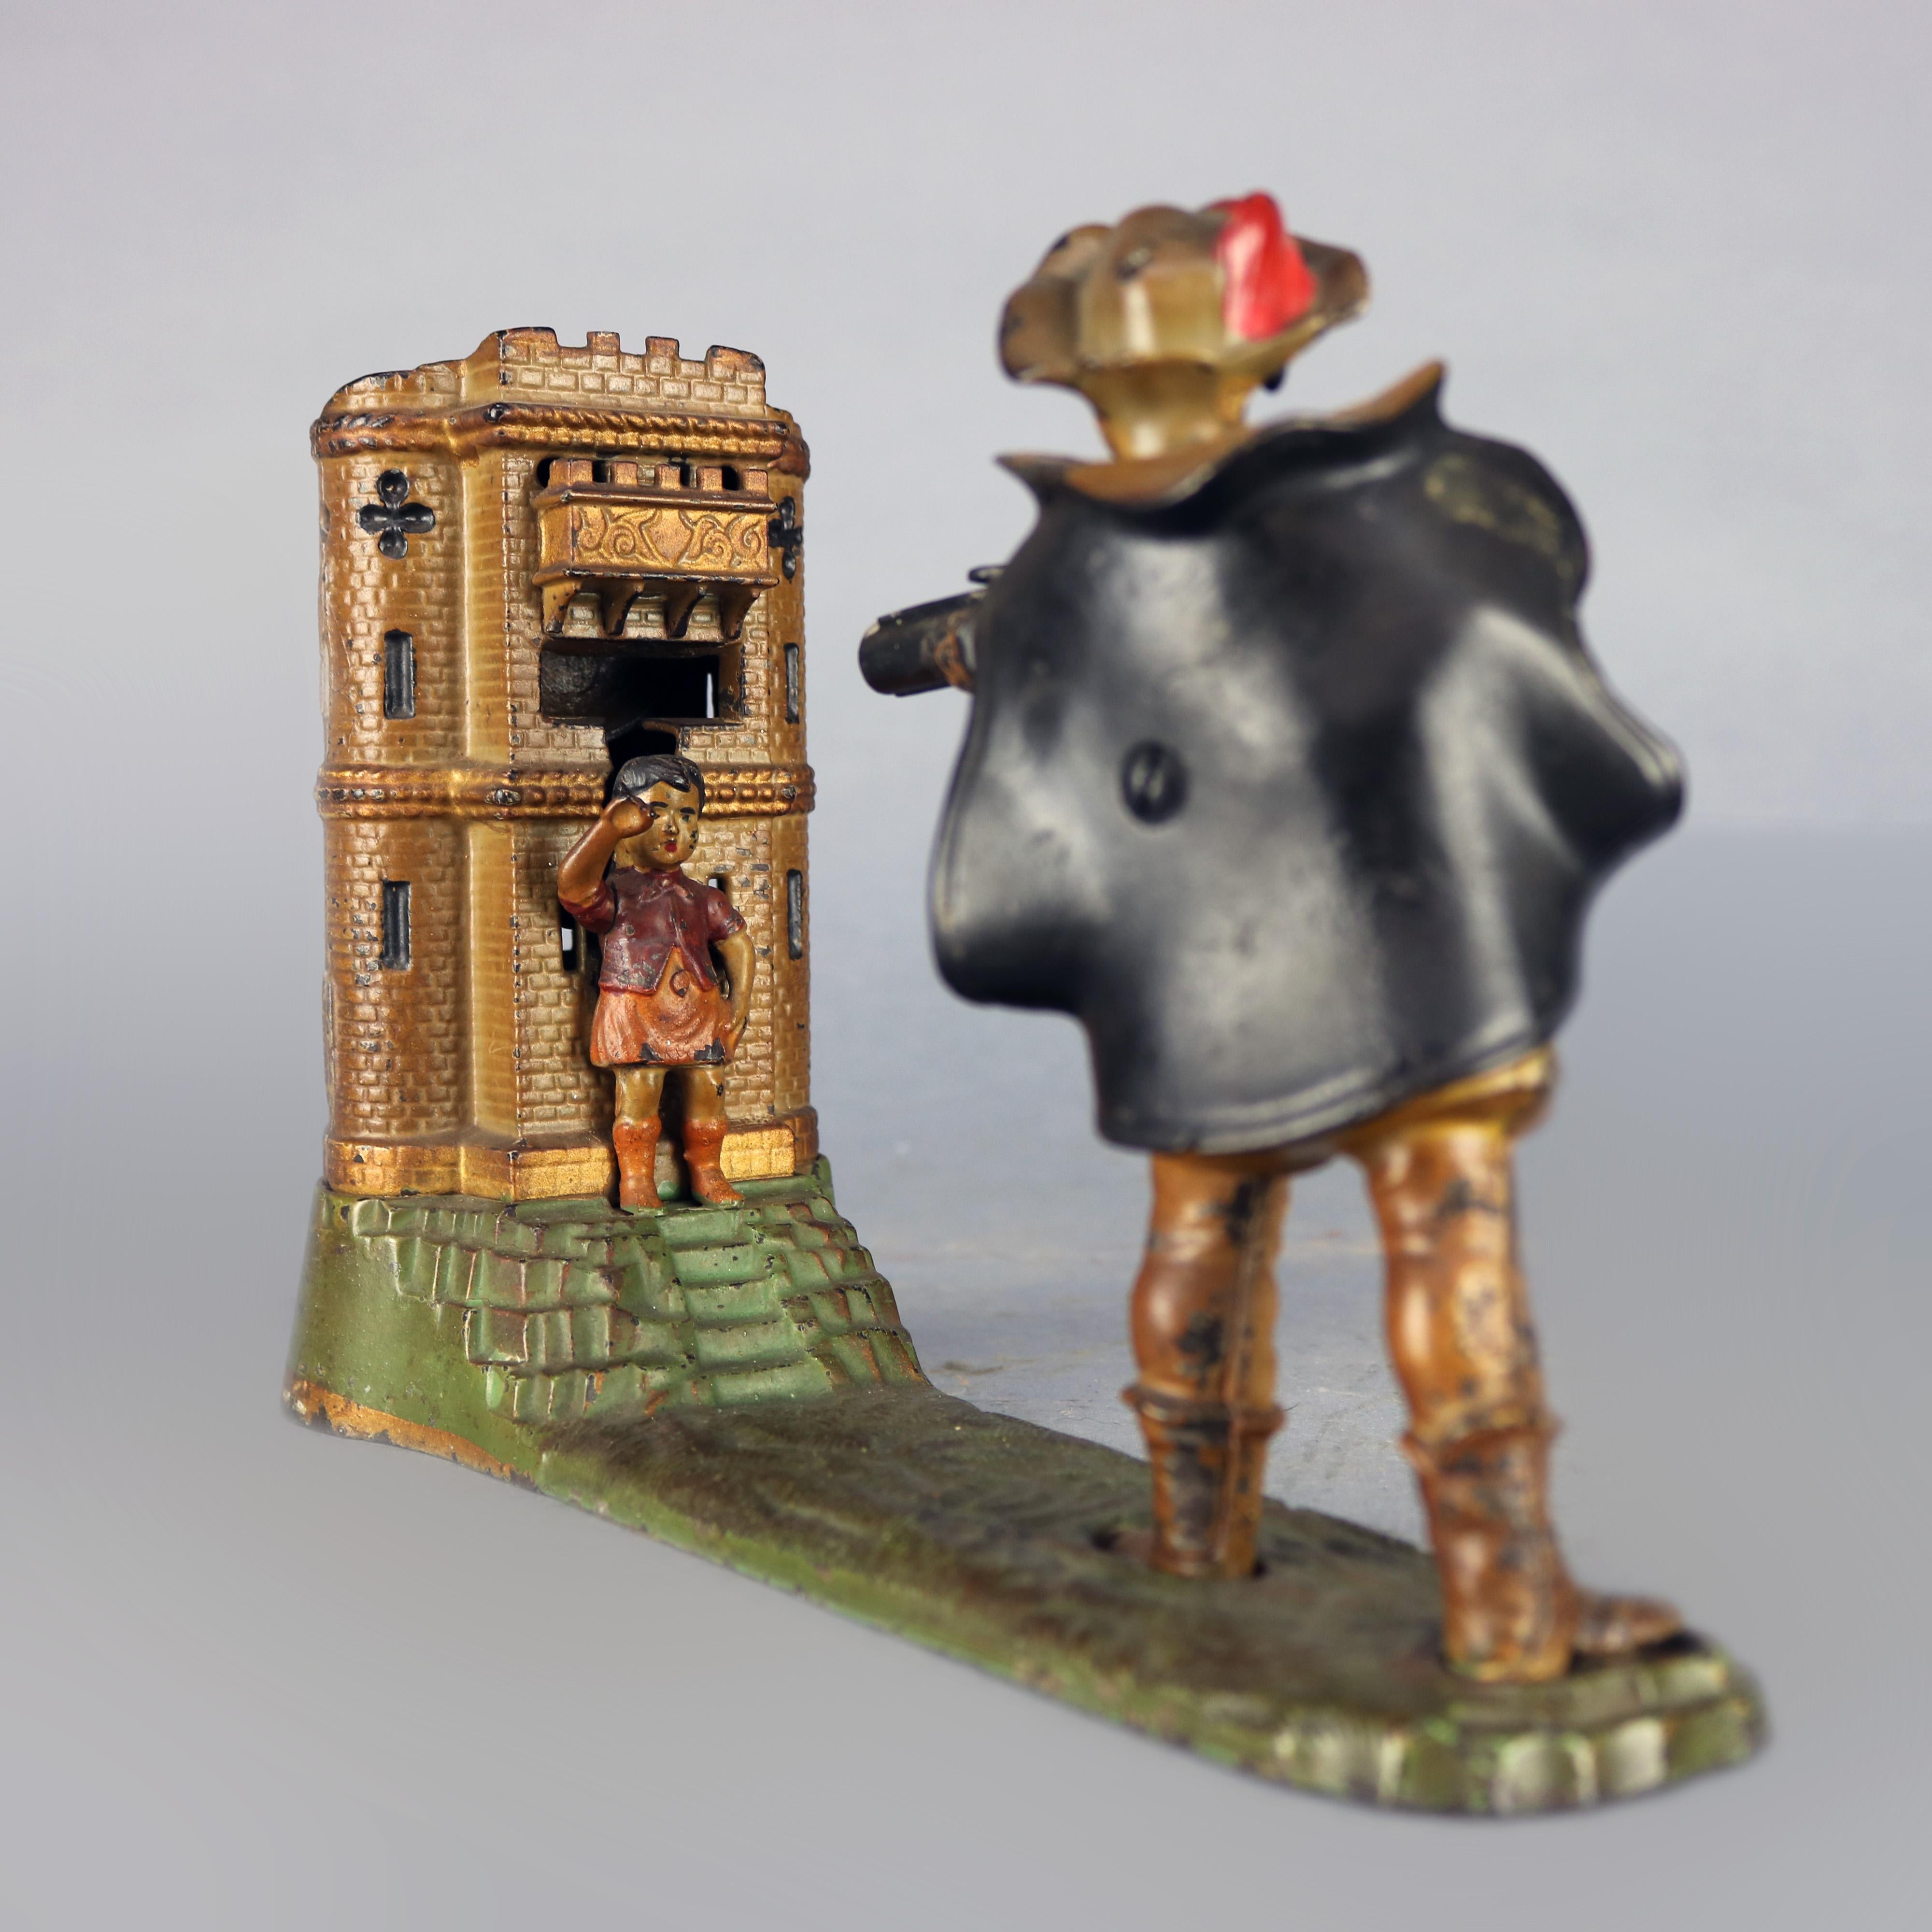 An antique mechanical bank bank by J.E Stevens offers polychrome painted cast iron construction and depicts William Tell, boy and structure, base embossed Patented June 30 1890